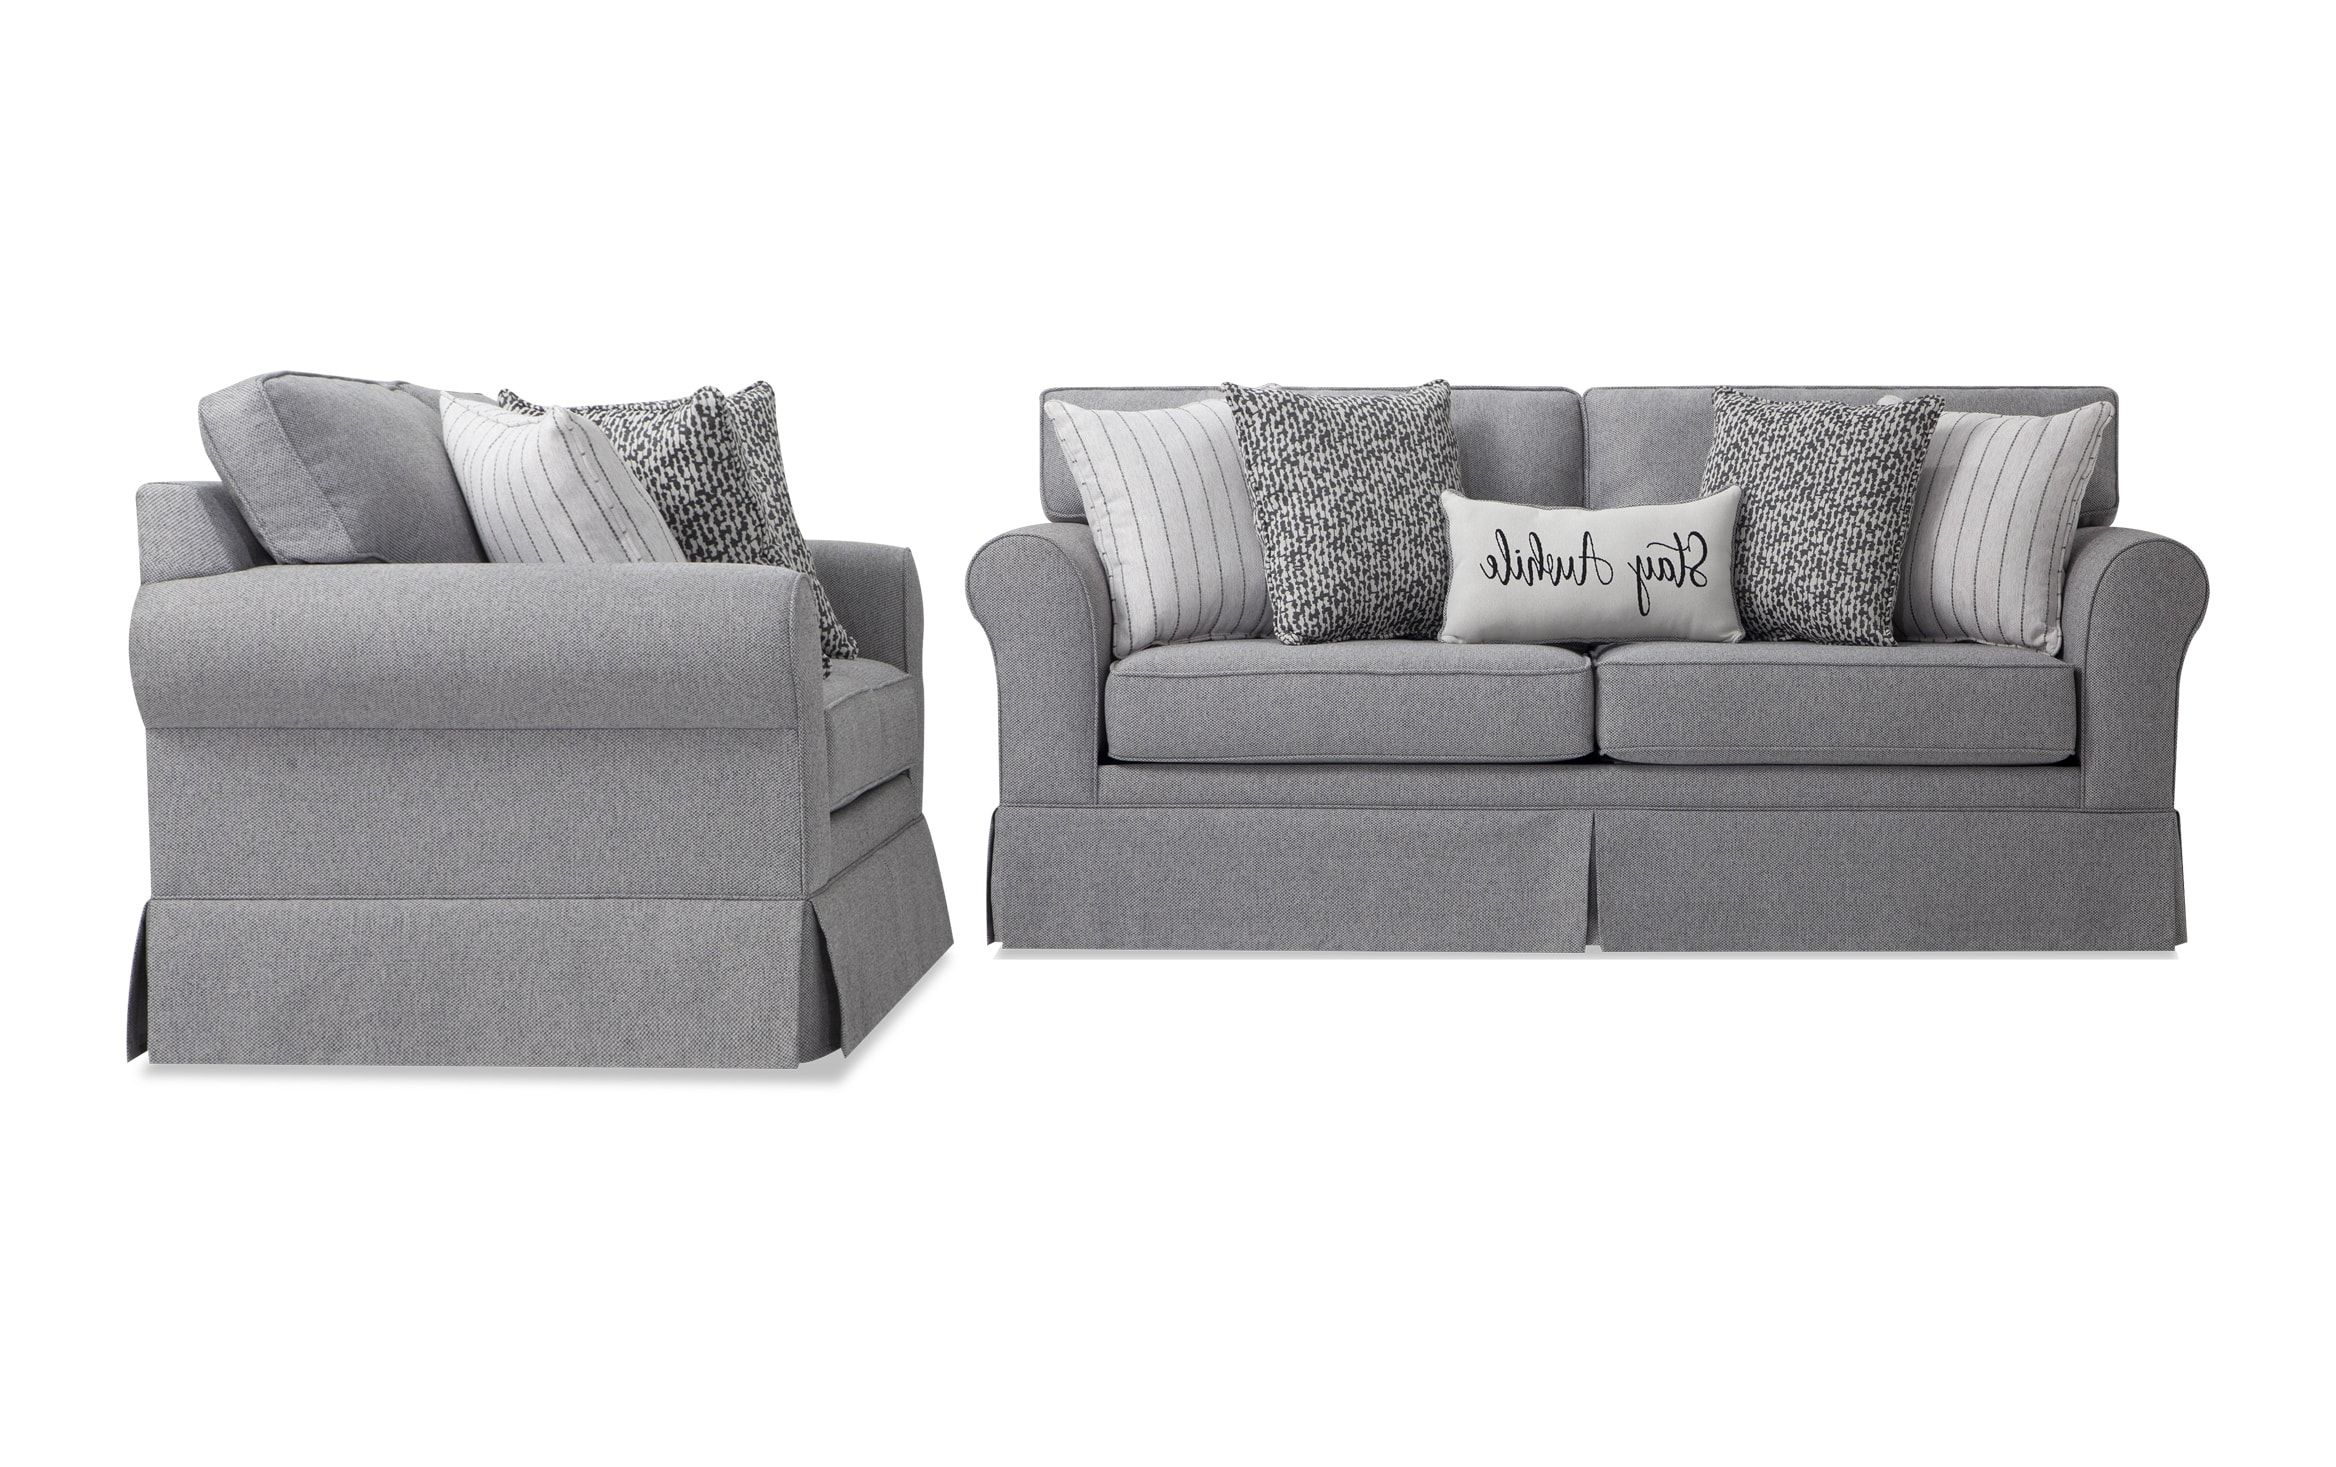 Scarlett Beige Sofas Throughout Trendy Bobs Furniture Sofa And Loveseat Sets (View 3 of 20)